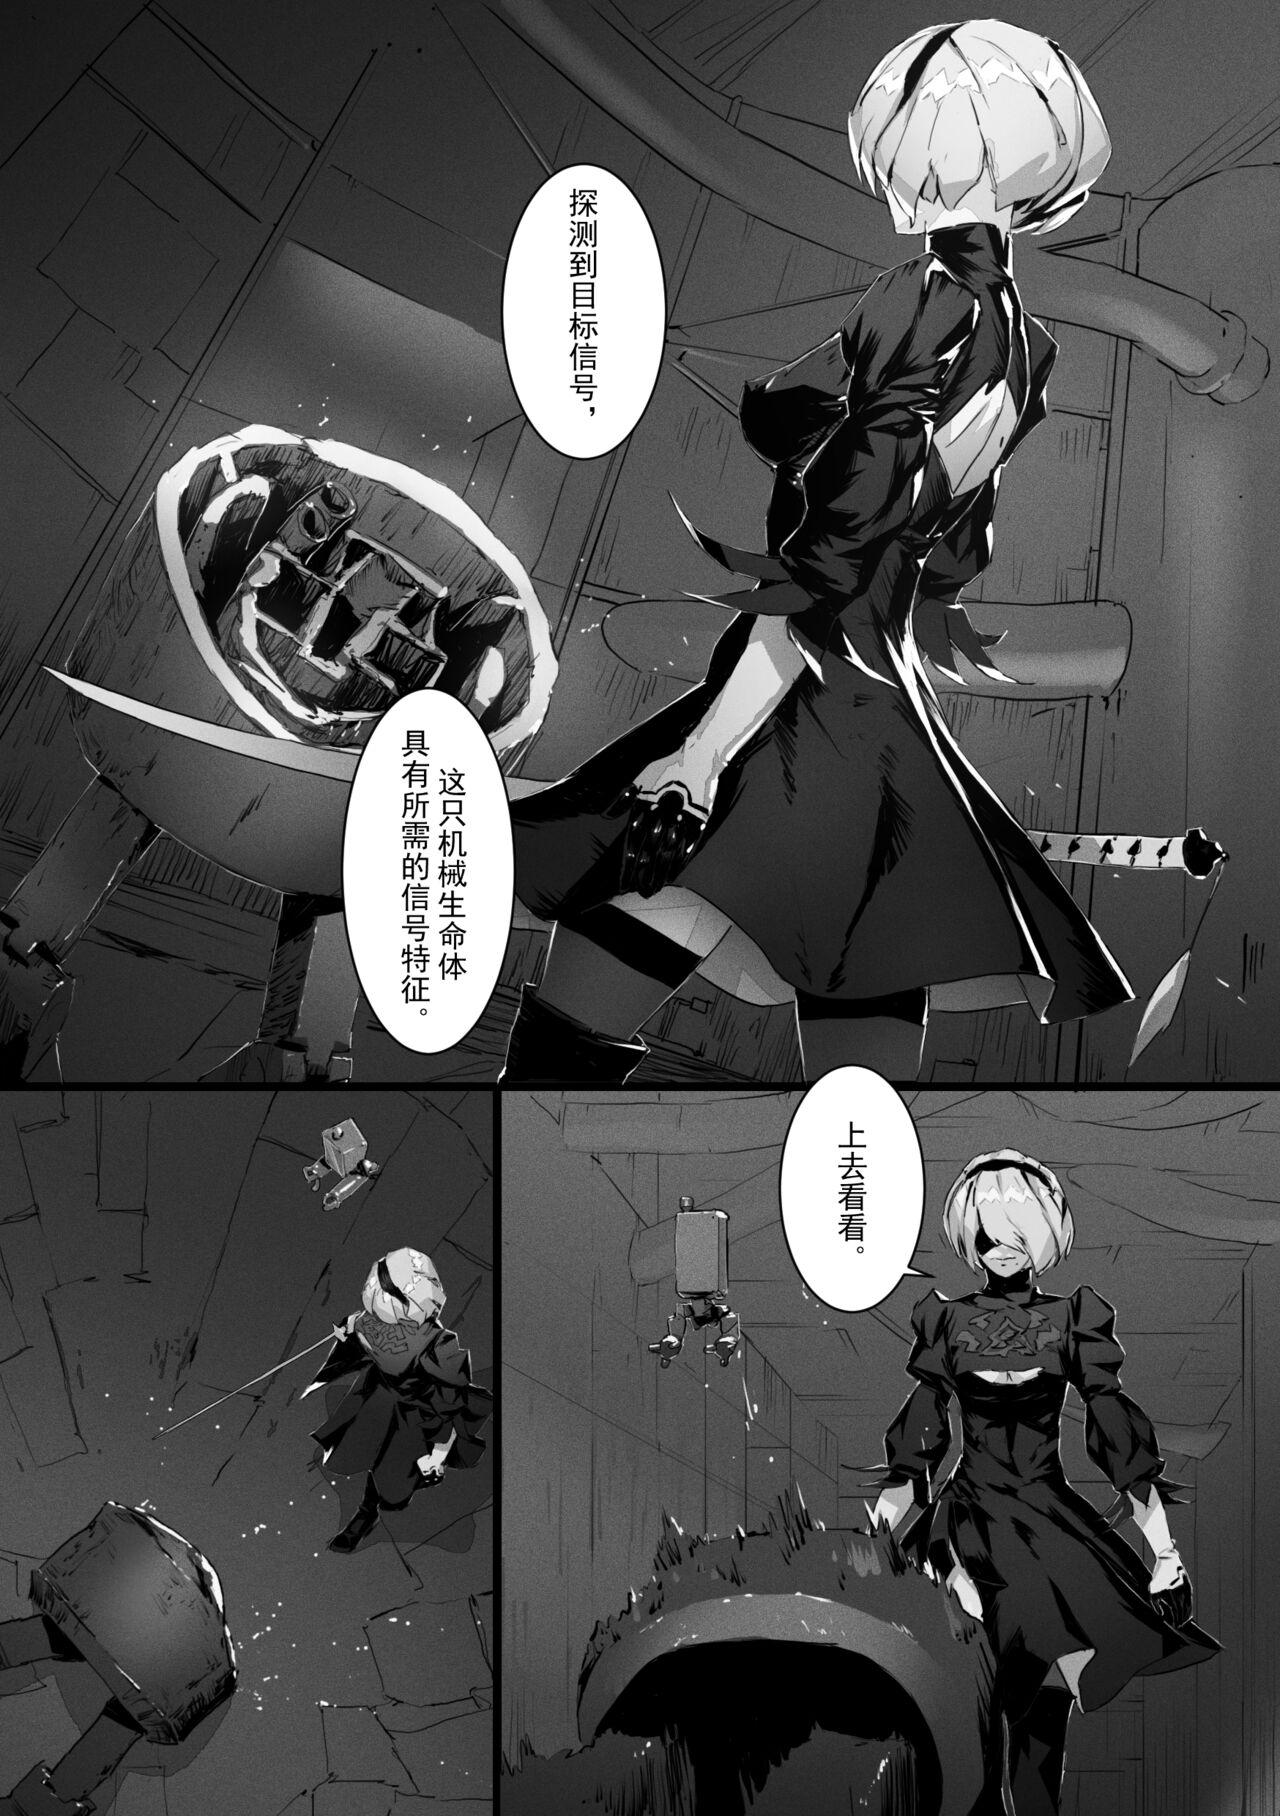  2B In Trouble Part 1-6 - Nier automata Real Amature Porn - Page 5